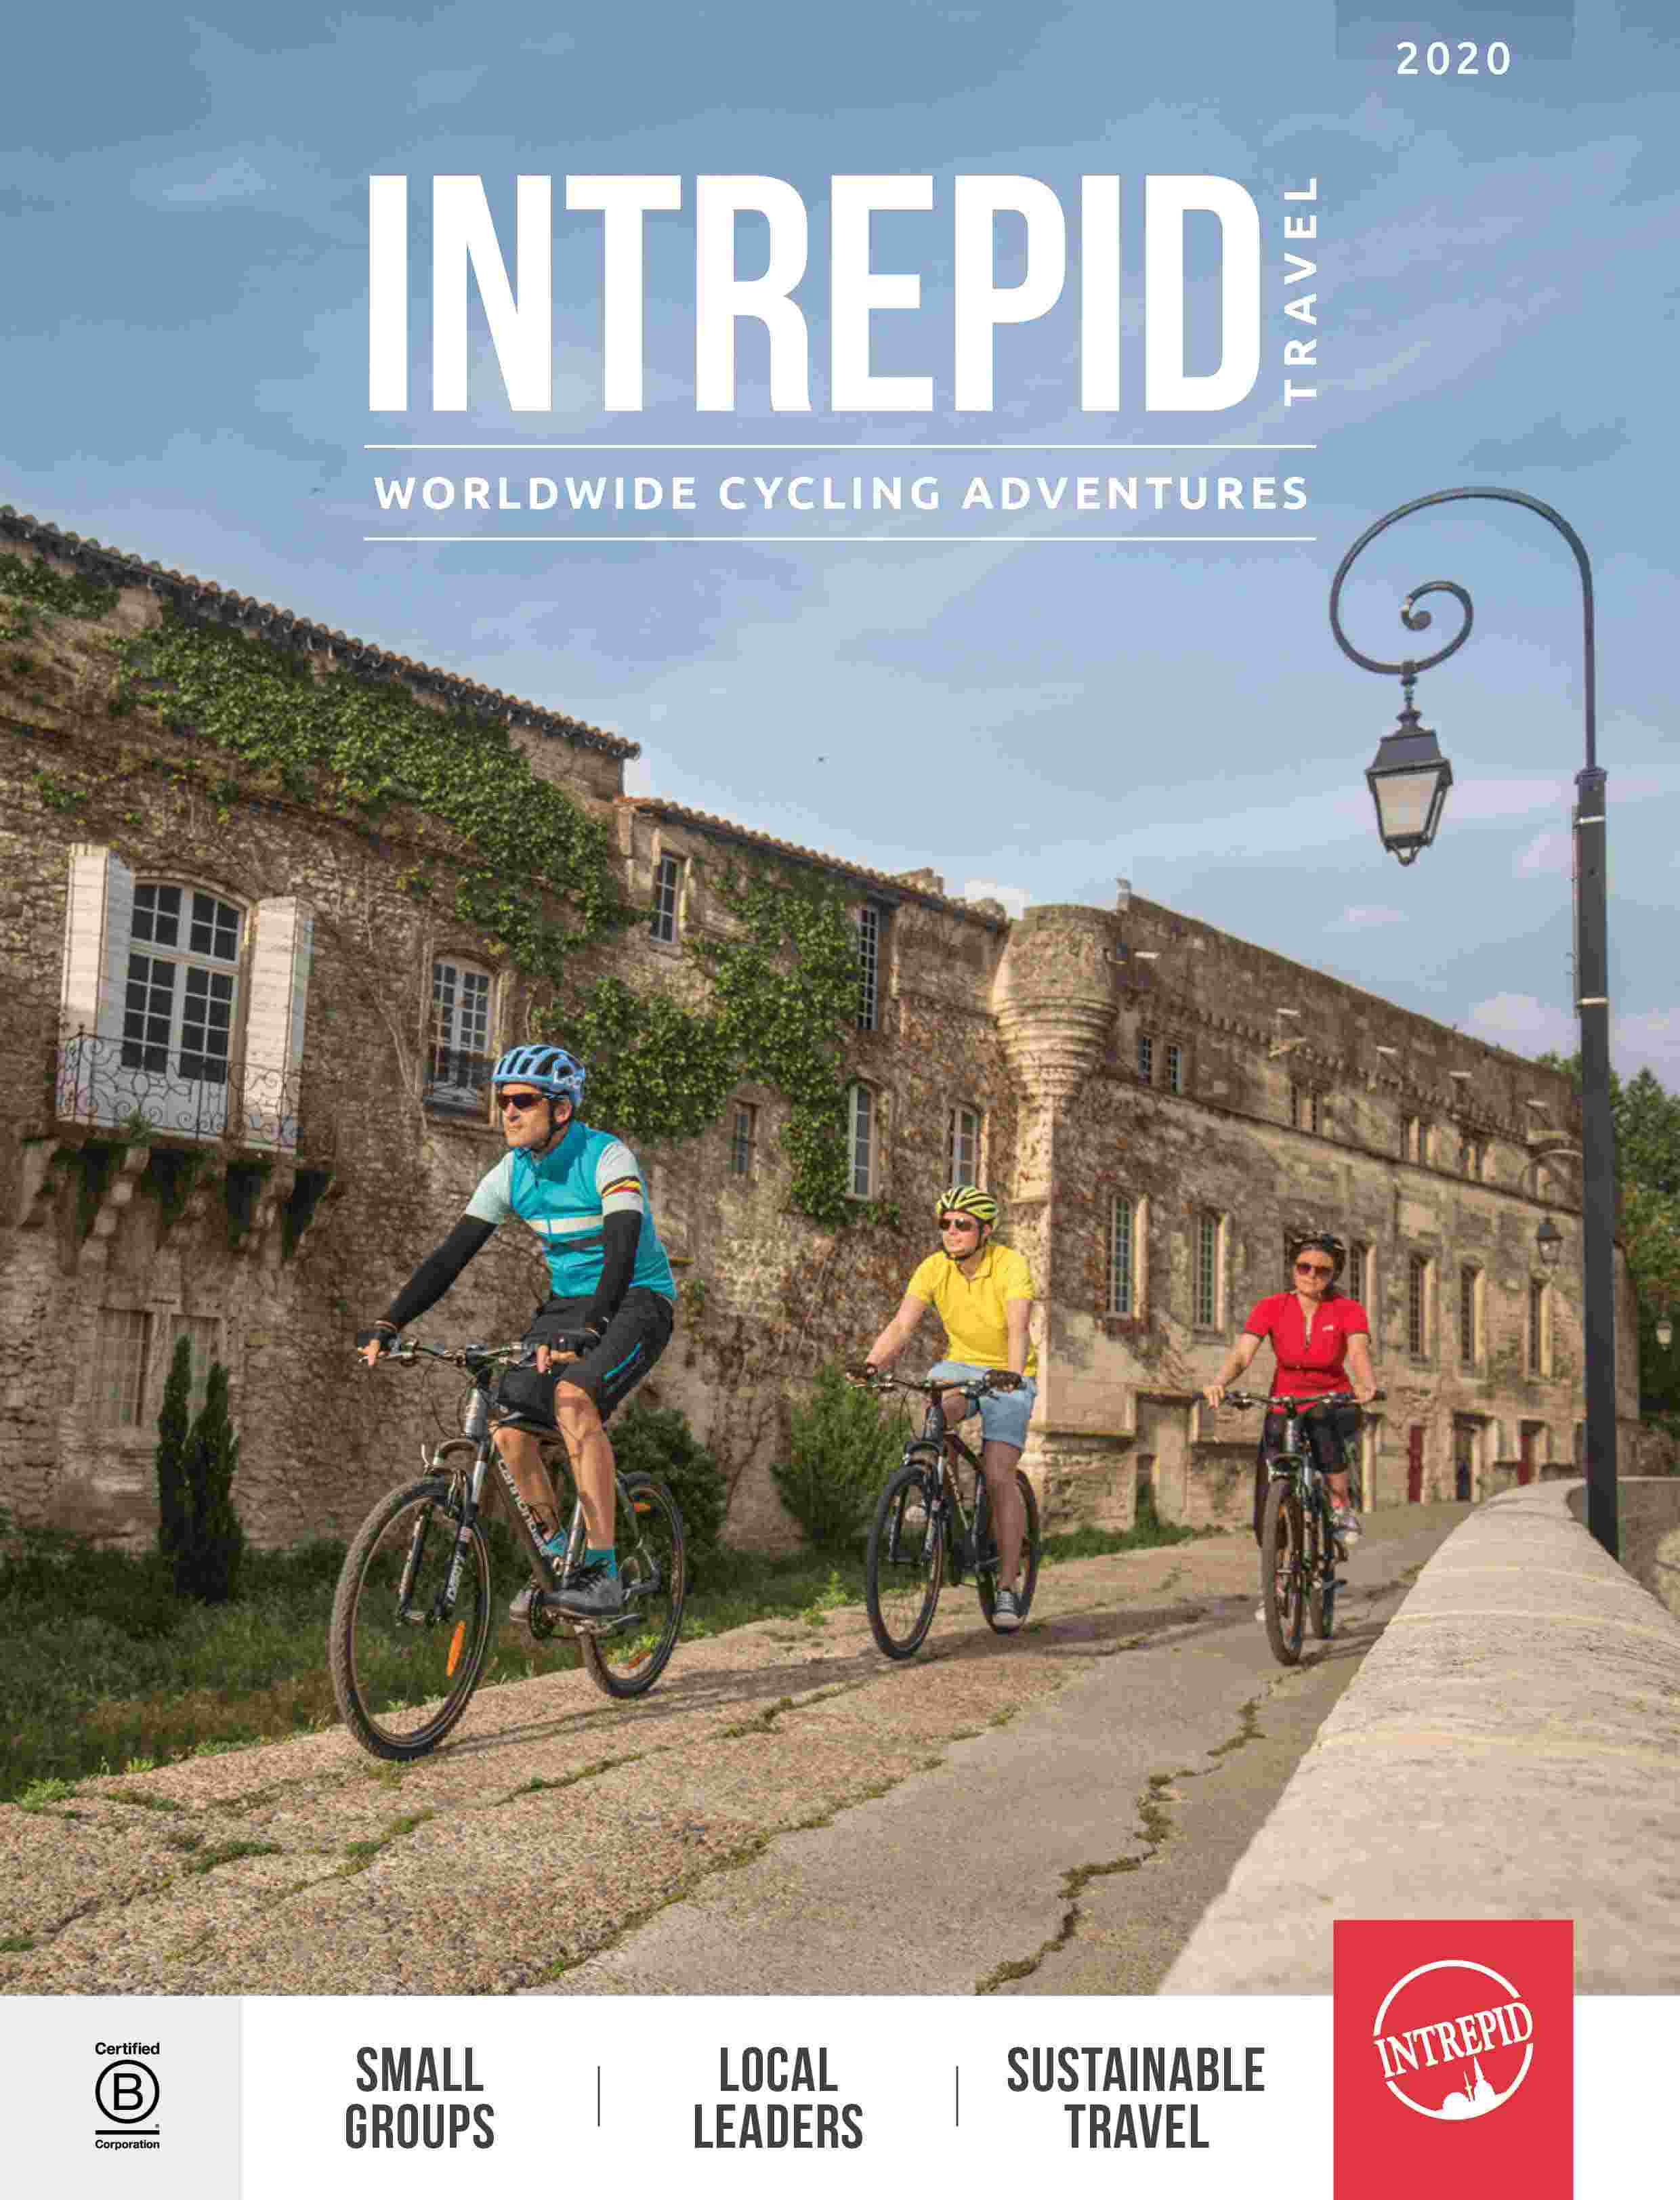 intrepid travel has recently been the proud